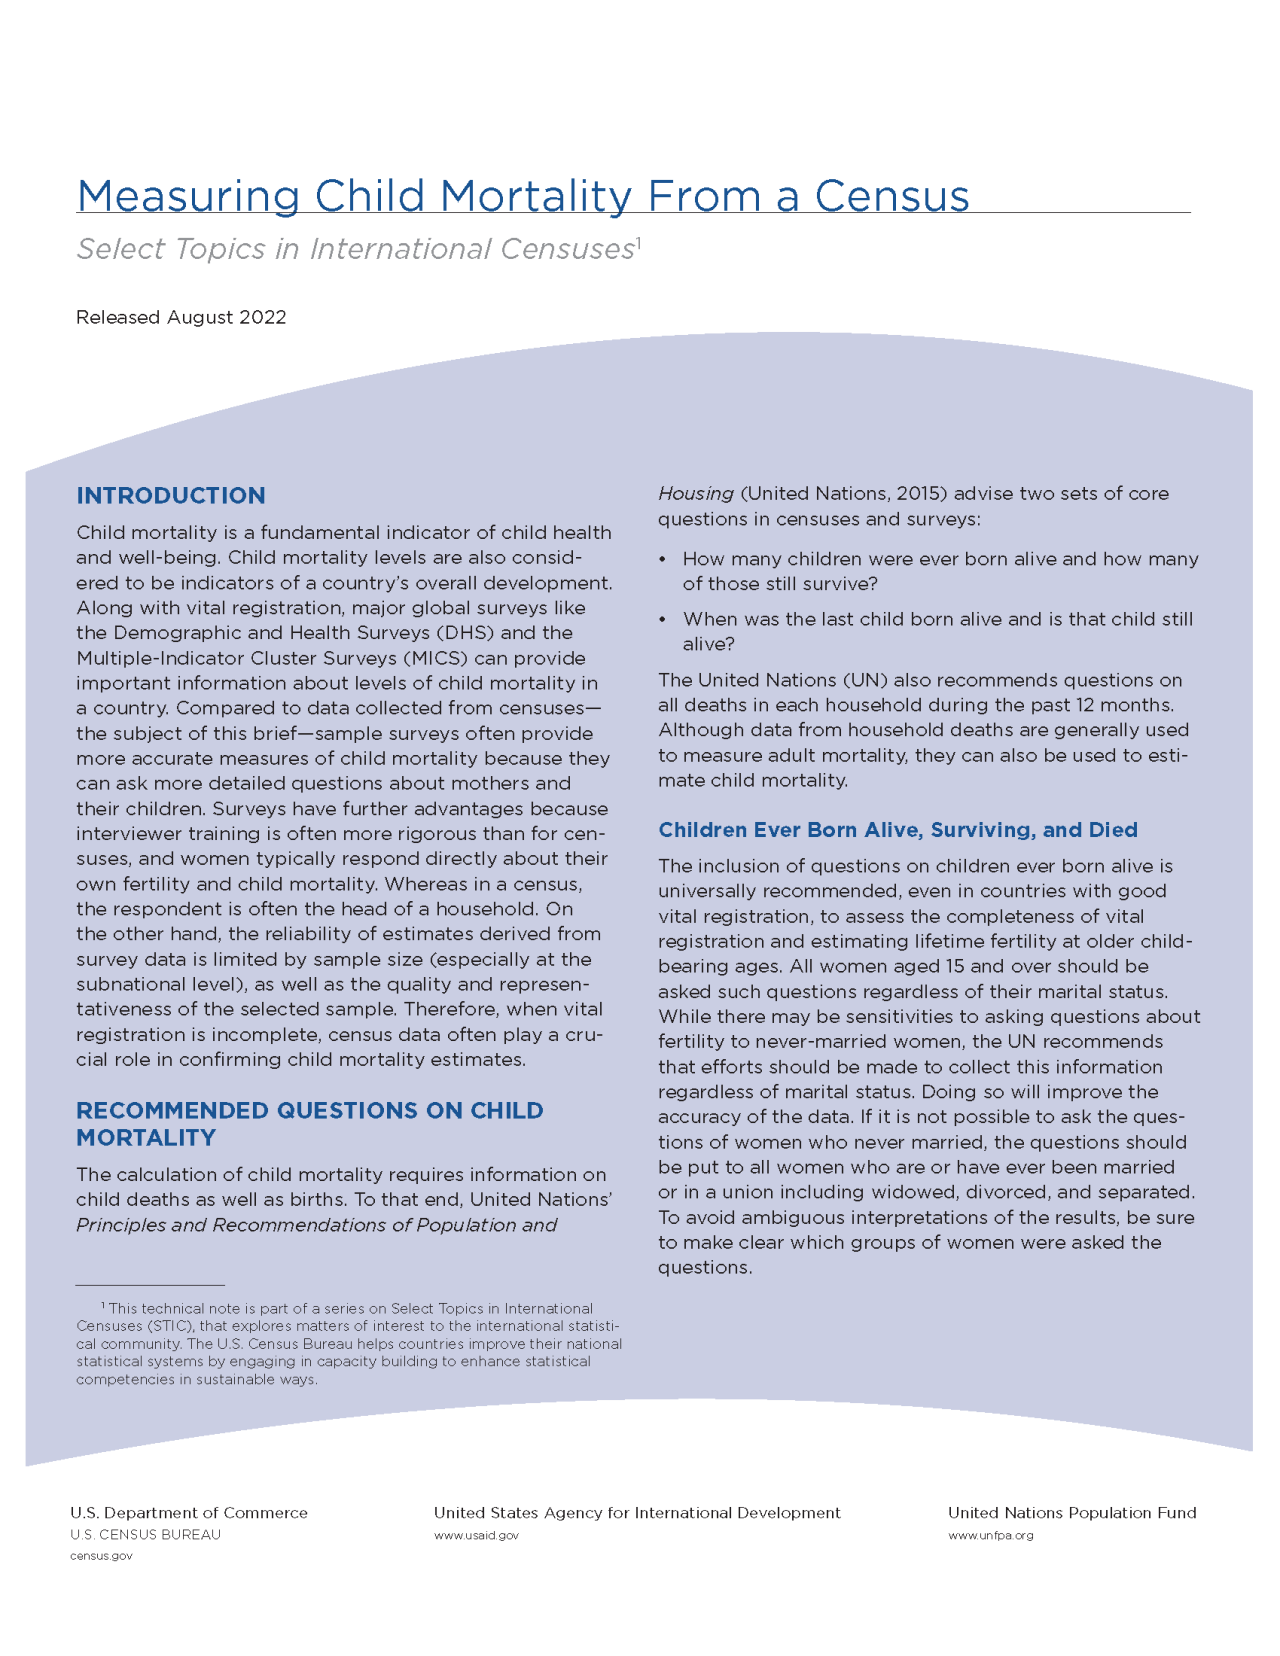 Measuring Child Mortality from a Census